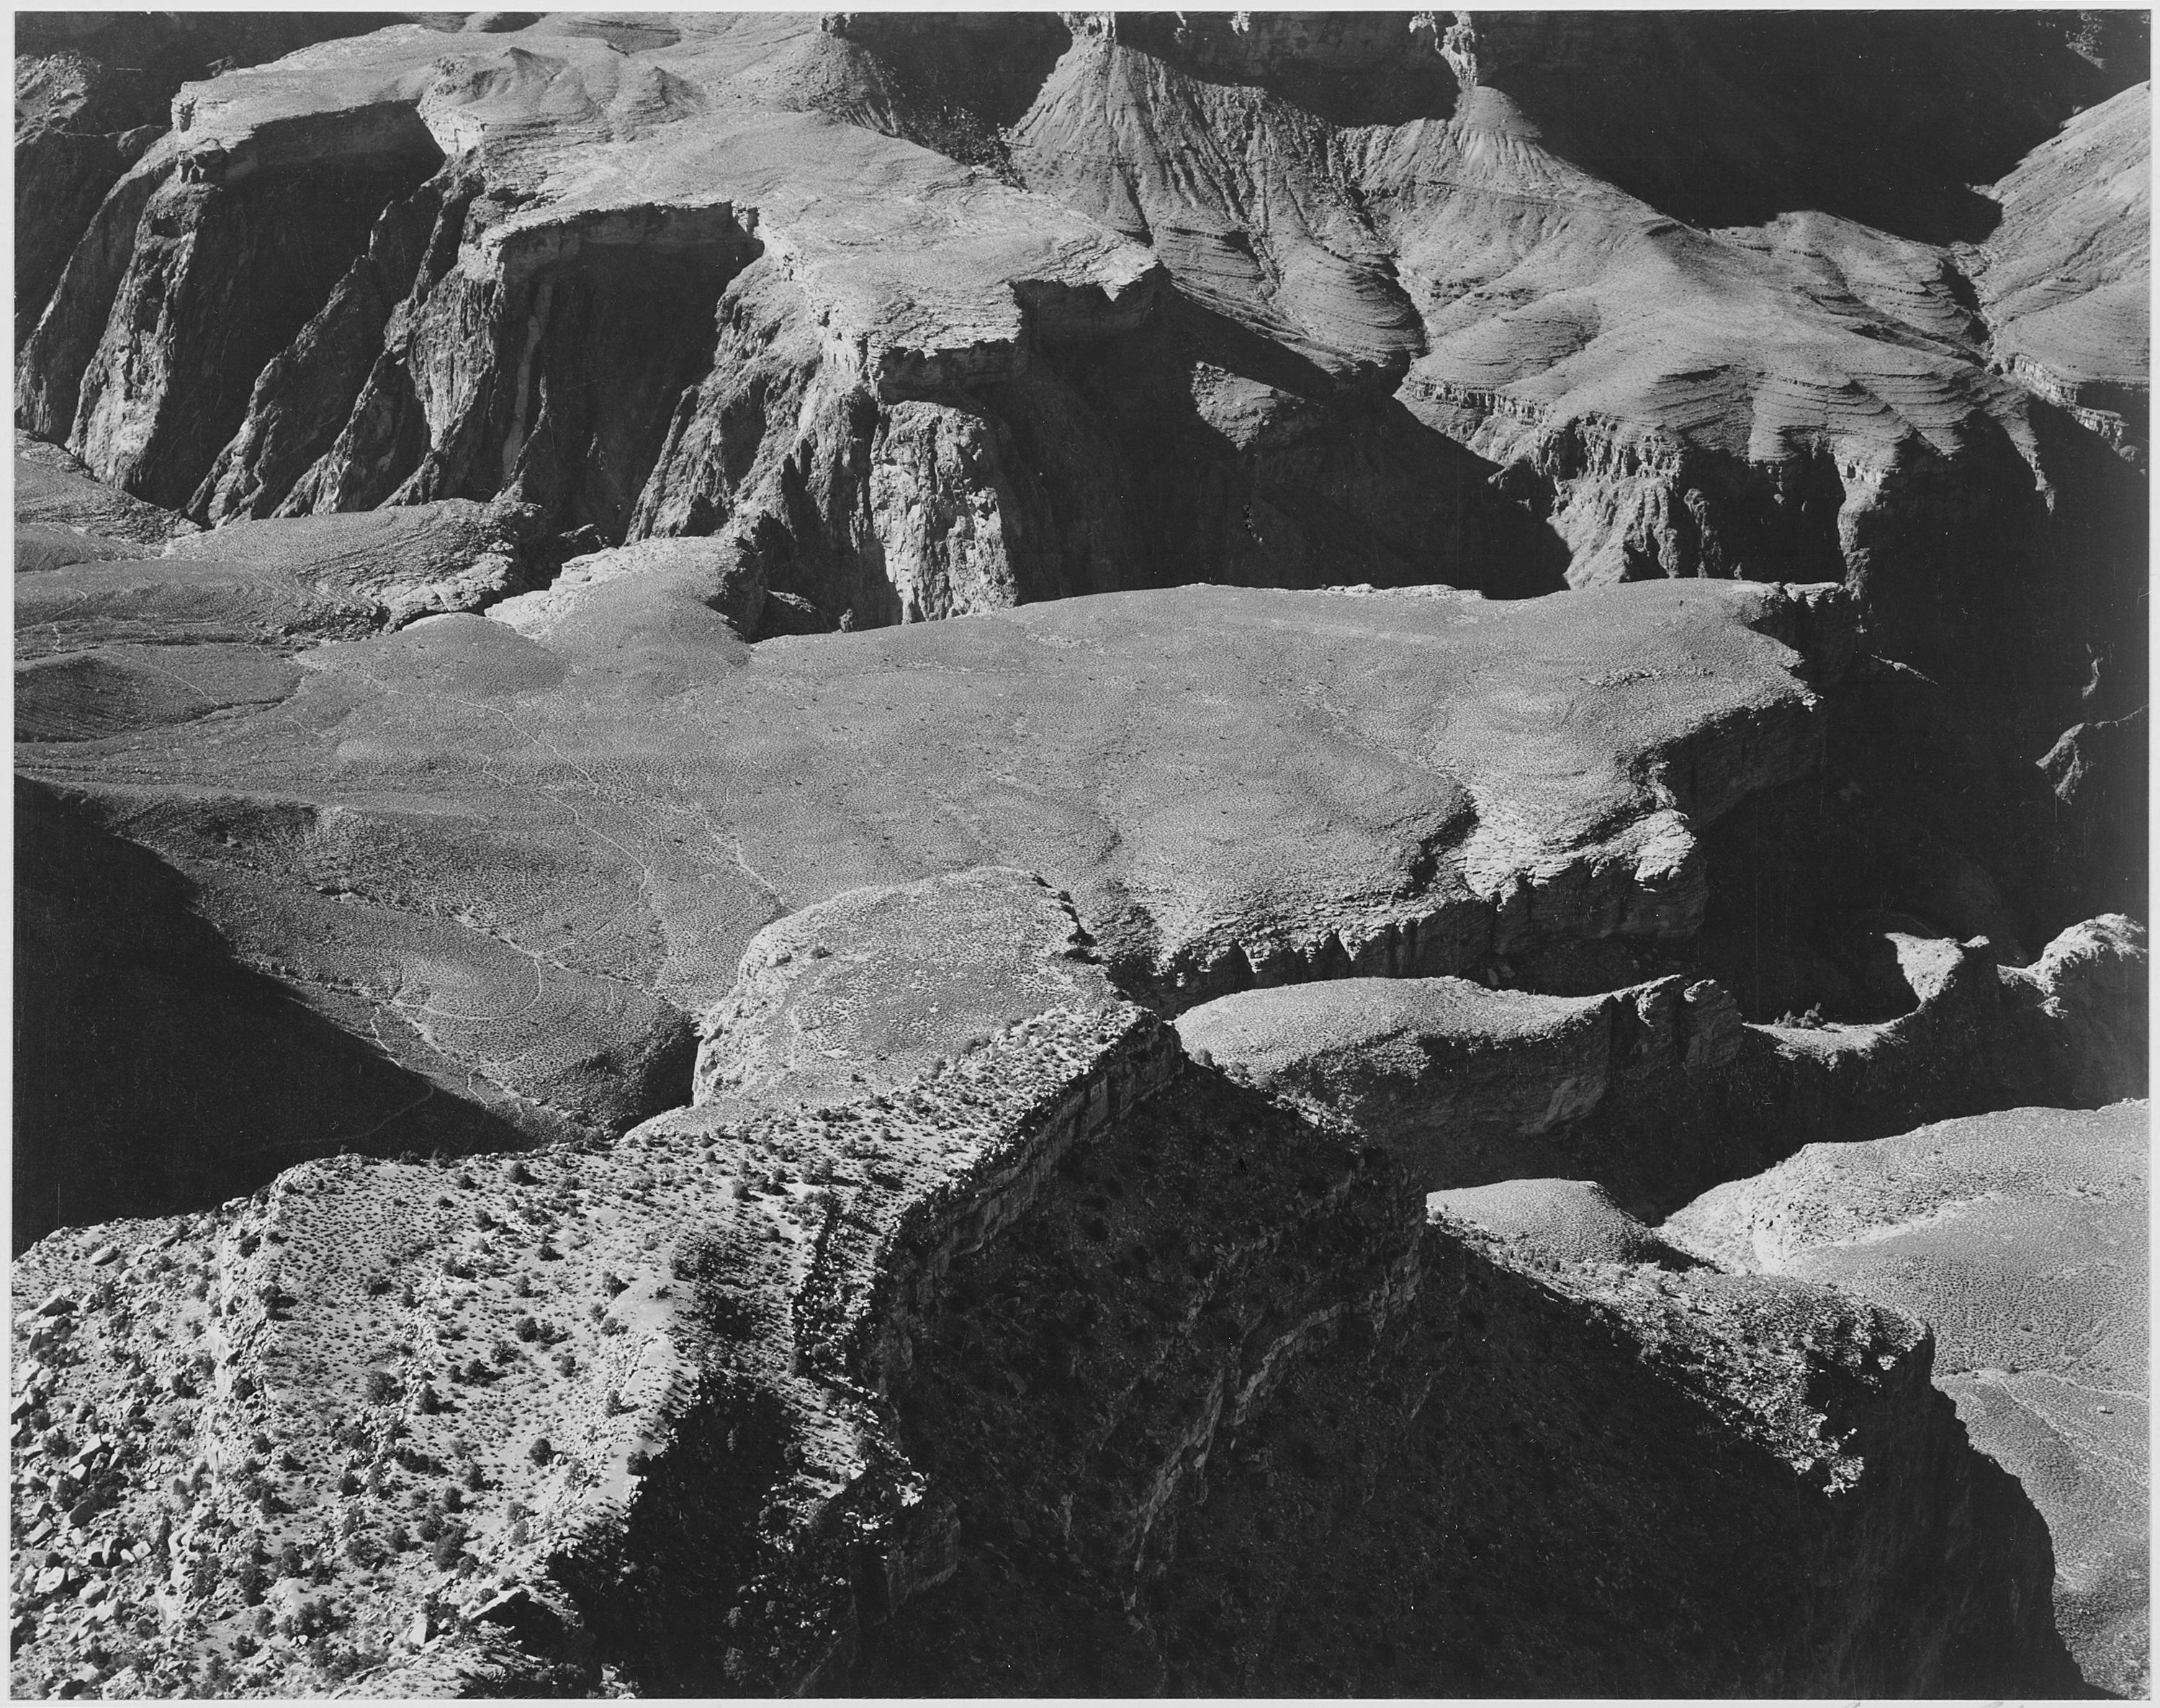 Ansel Adams - National Archives 79-AA-F19